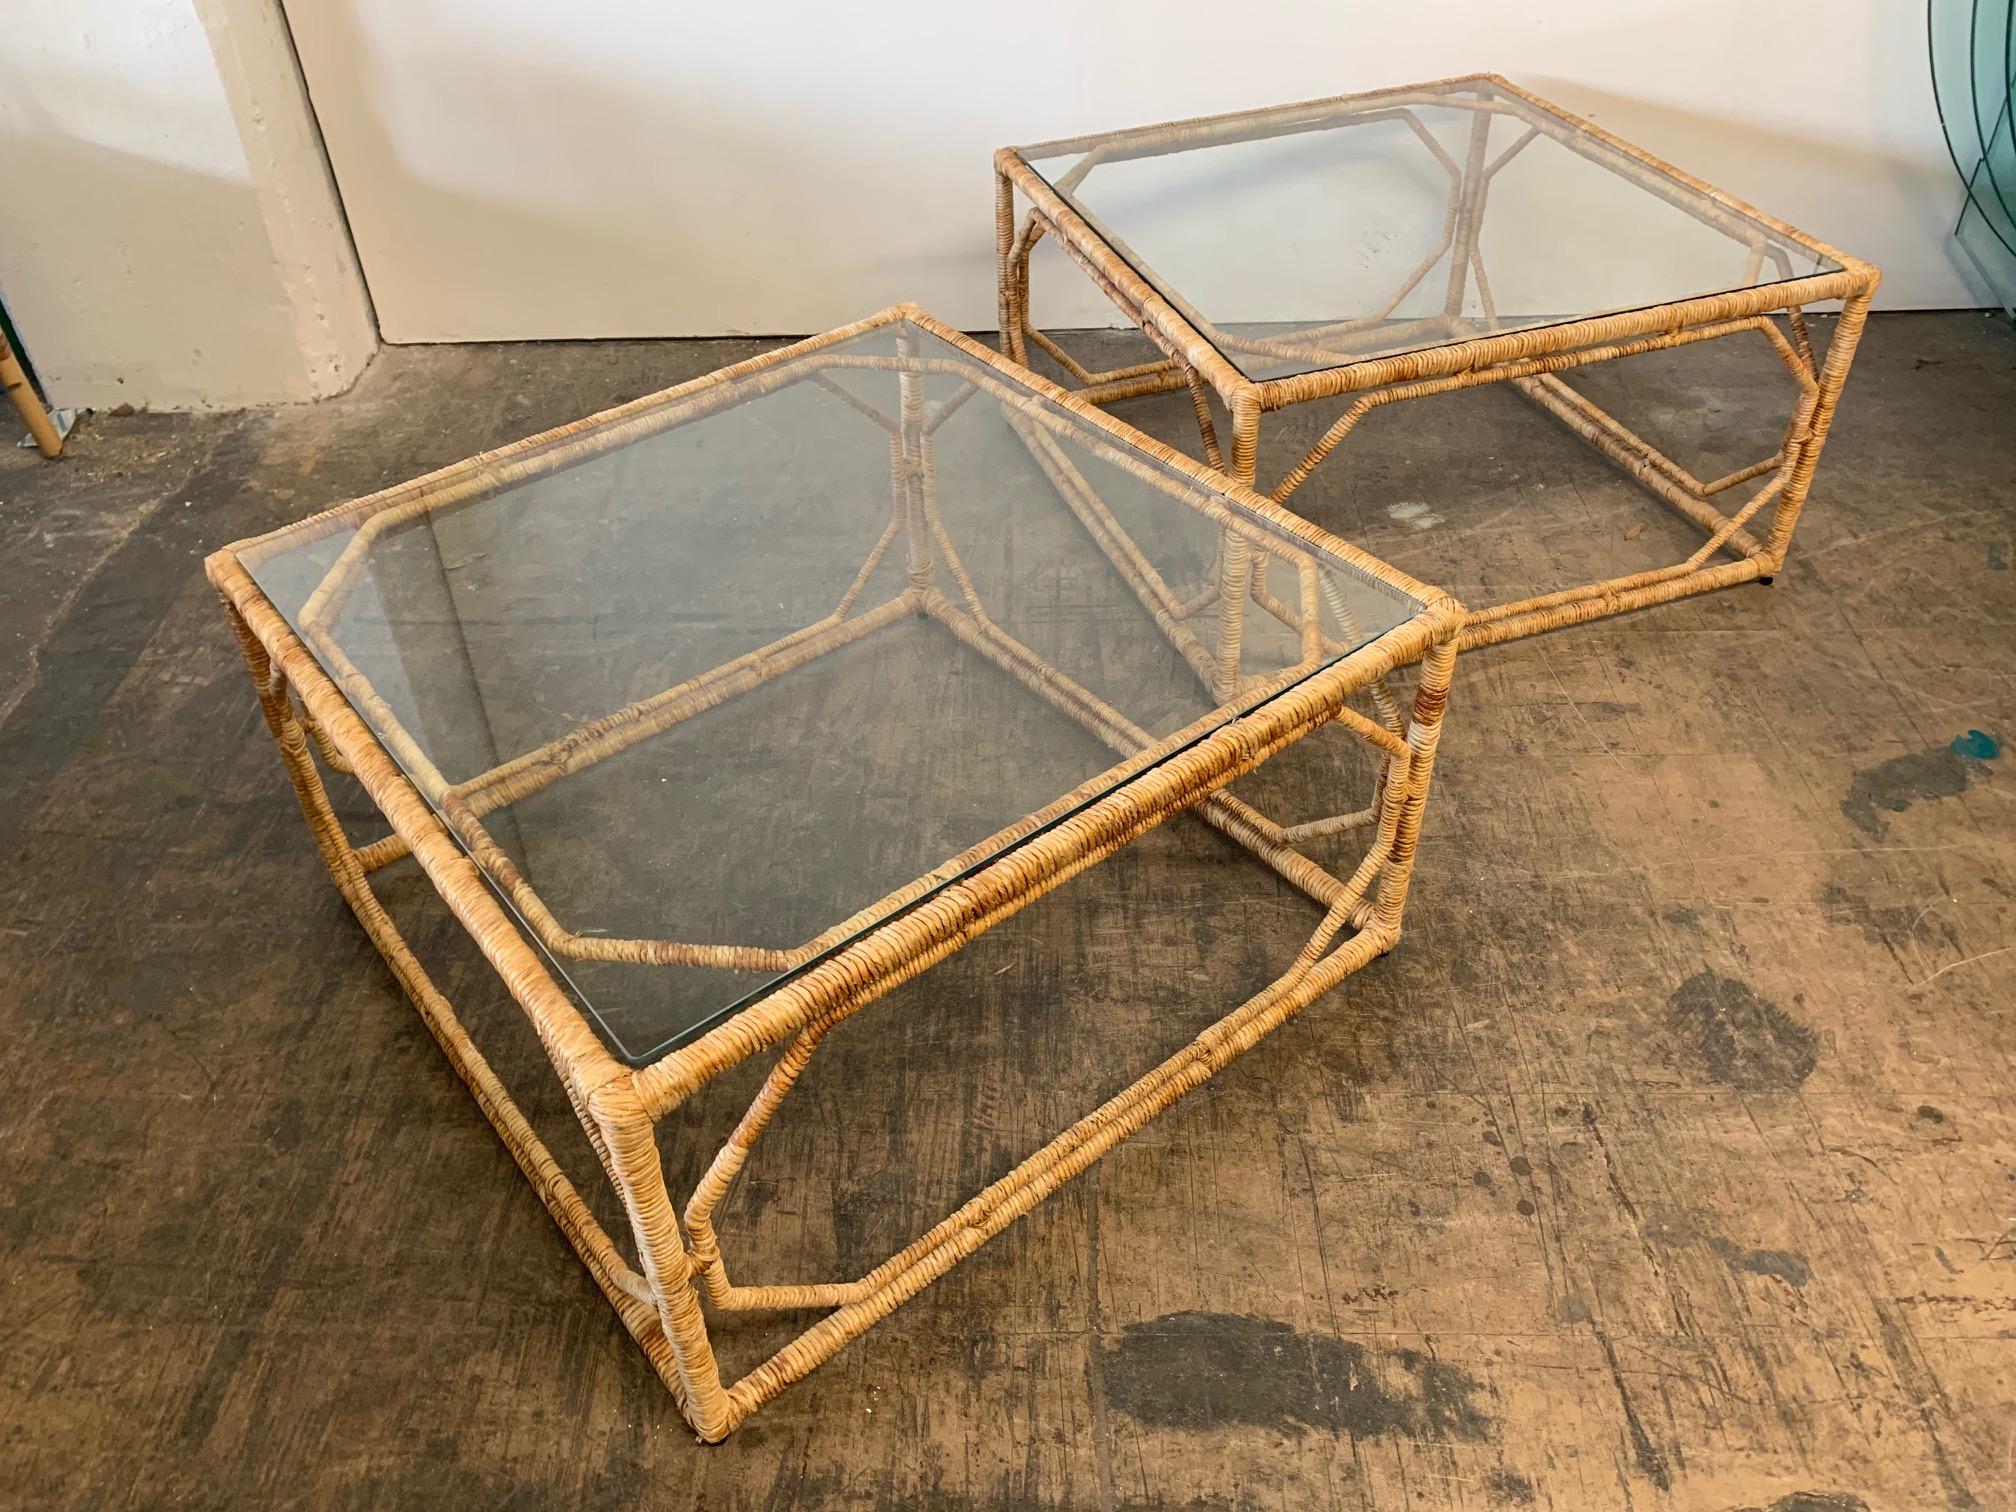 Rattan wrapped side tables feature solid iron construction and glass tops. Very good condition with minor imperfections consistent with age.